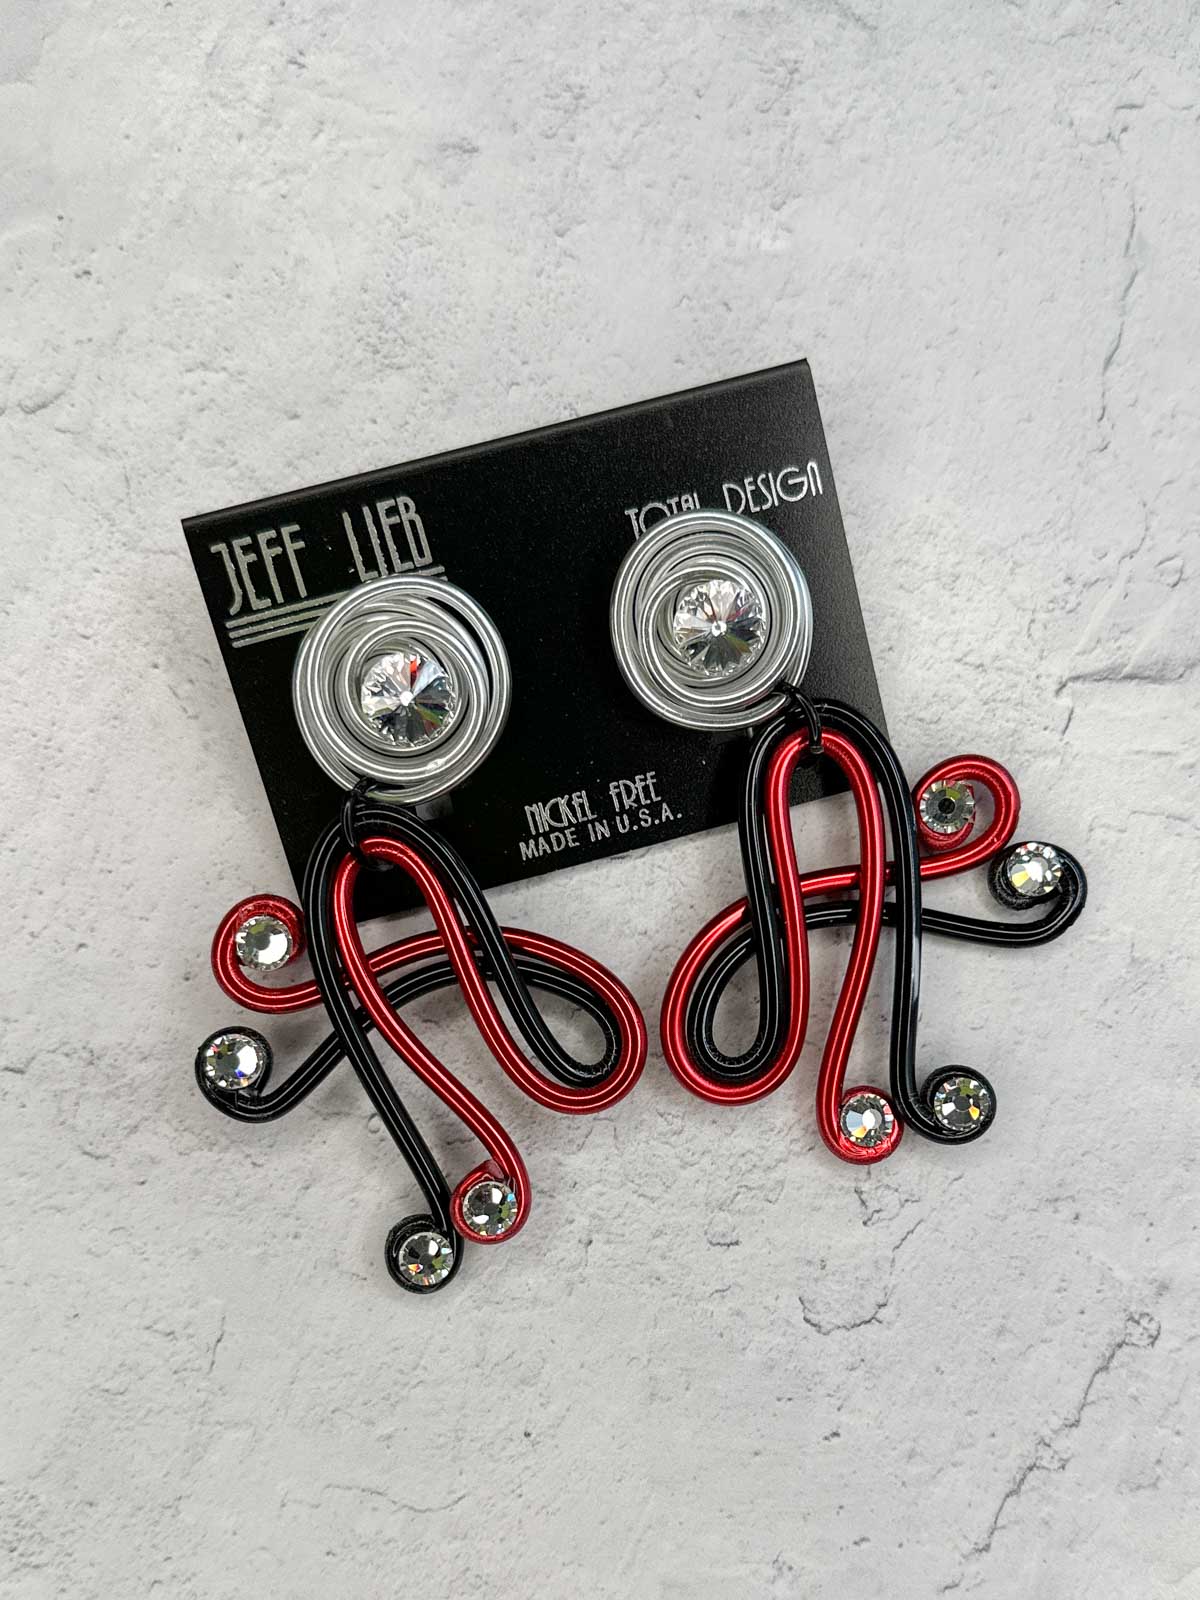 Jeff Lieb Total Design Jewelry Mix Trio Wire Post Drop Earrings, Silver/Black/Red - Statement Boutique